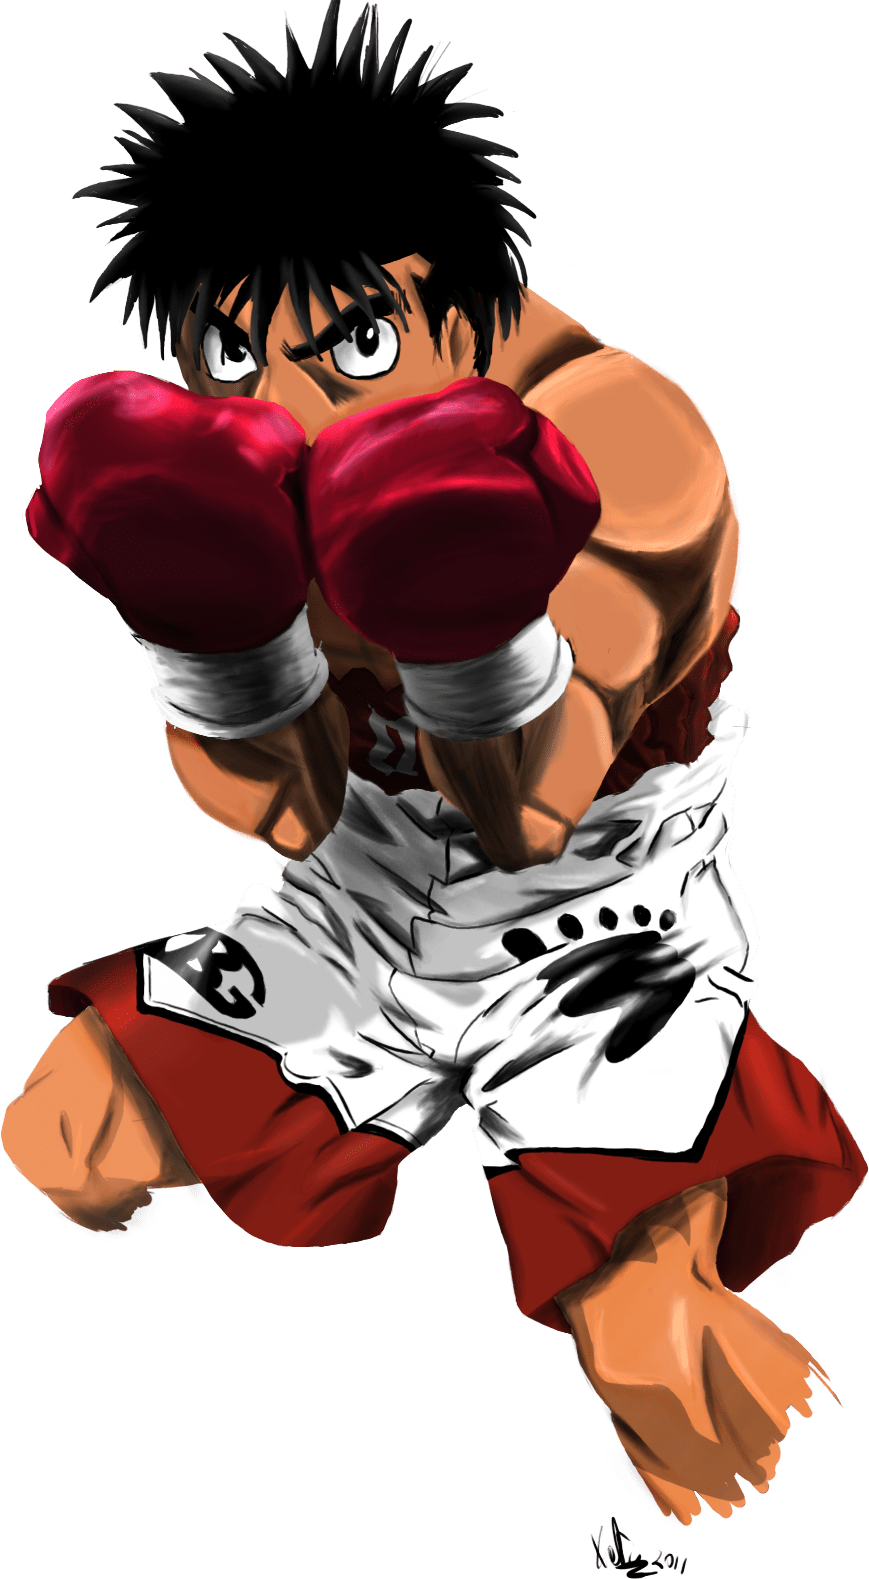 Hajime no Ippo wallpaper by Hil18 - Download on ZEDGE™